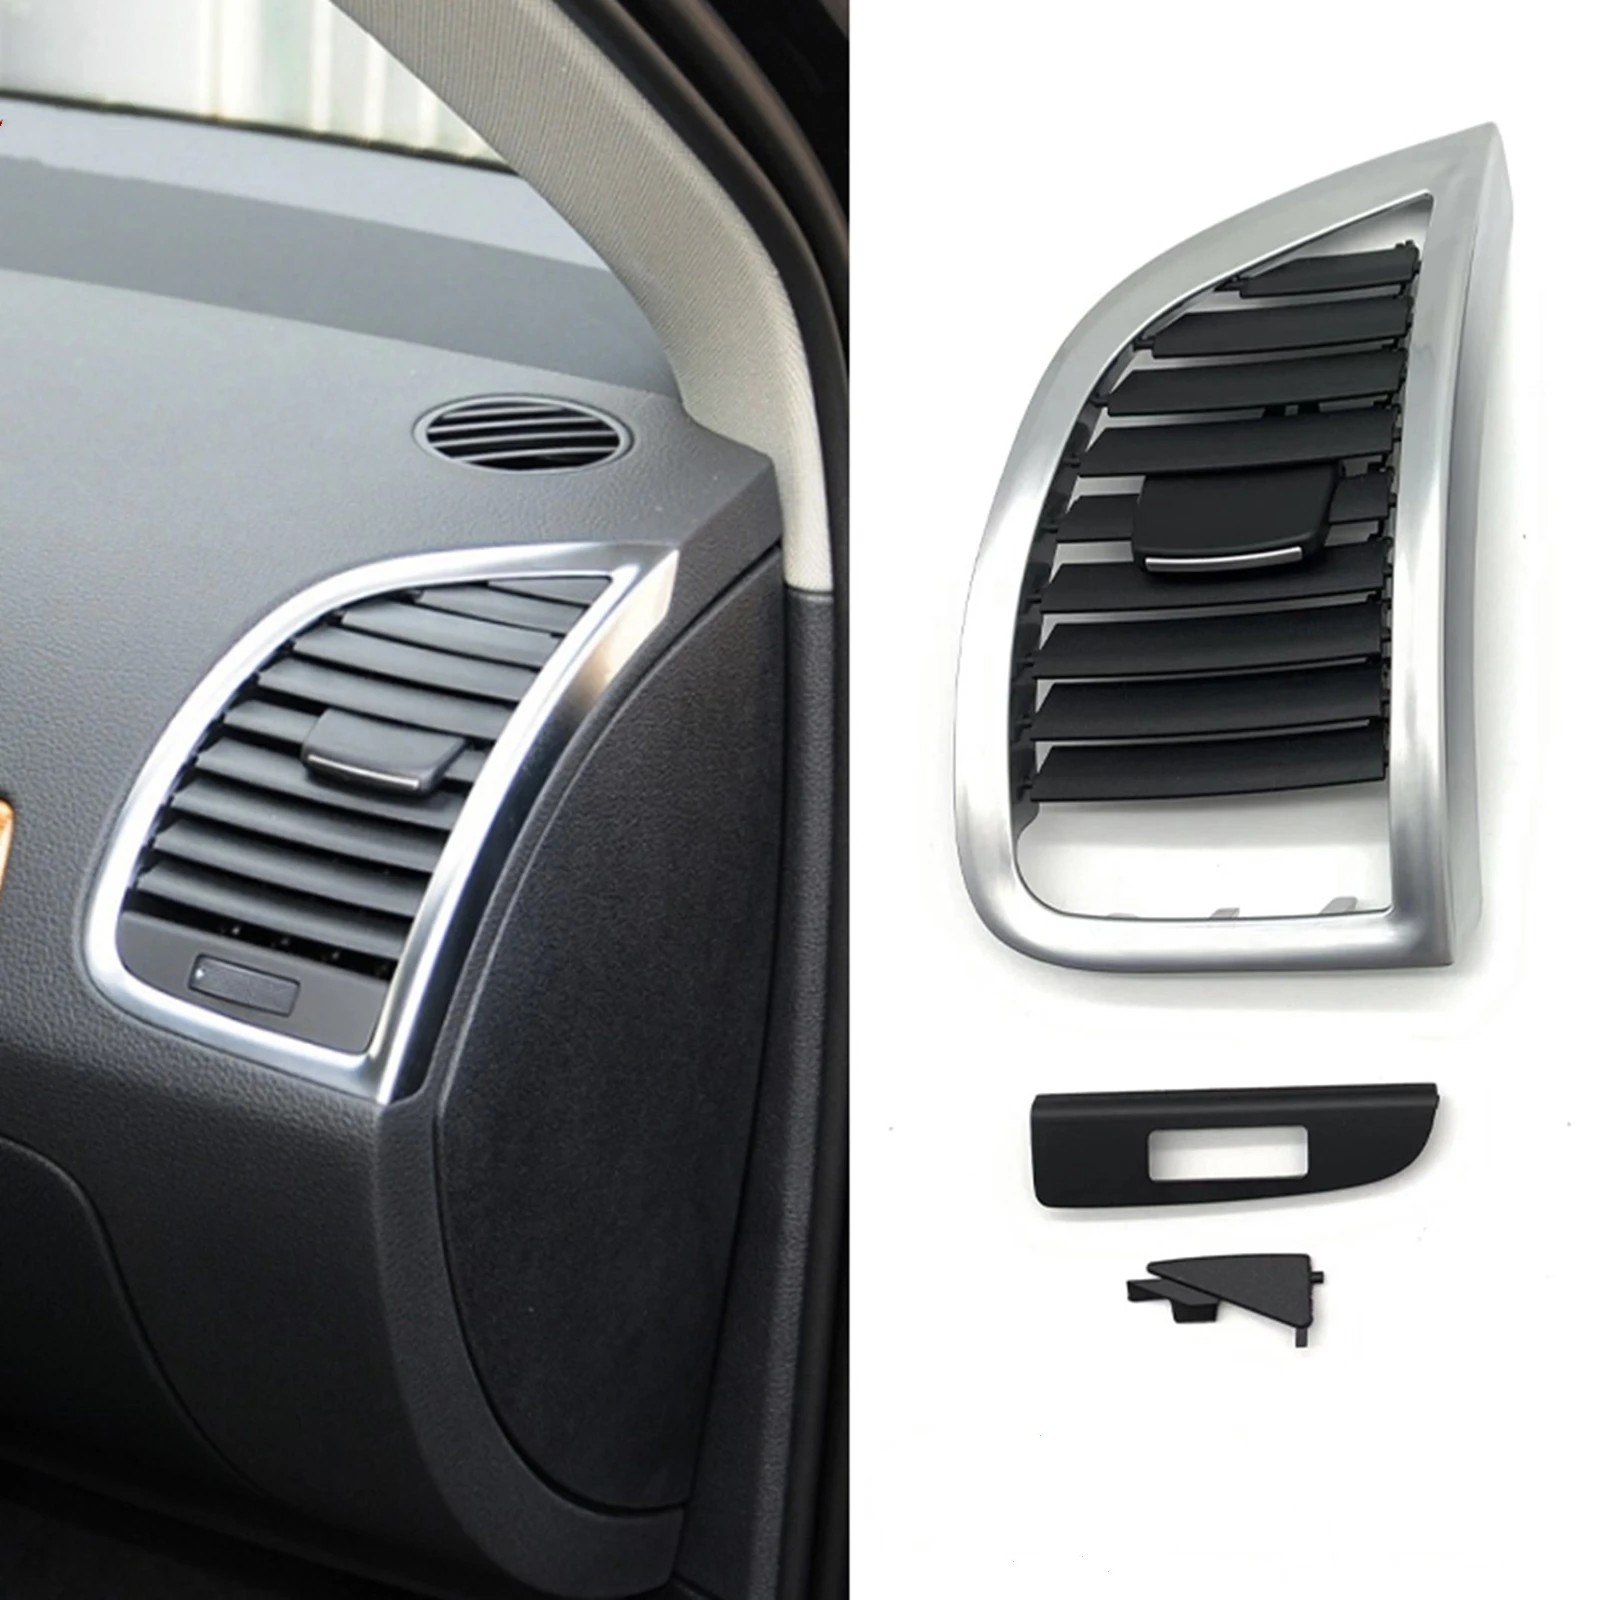 

For Audi Q7 2007-2015 Car Dashboard A/C Air Vent Grille Cover Panel Interior Dash Board Side Outlet Duct Conditioning Grill Trim